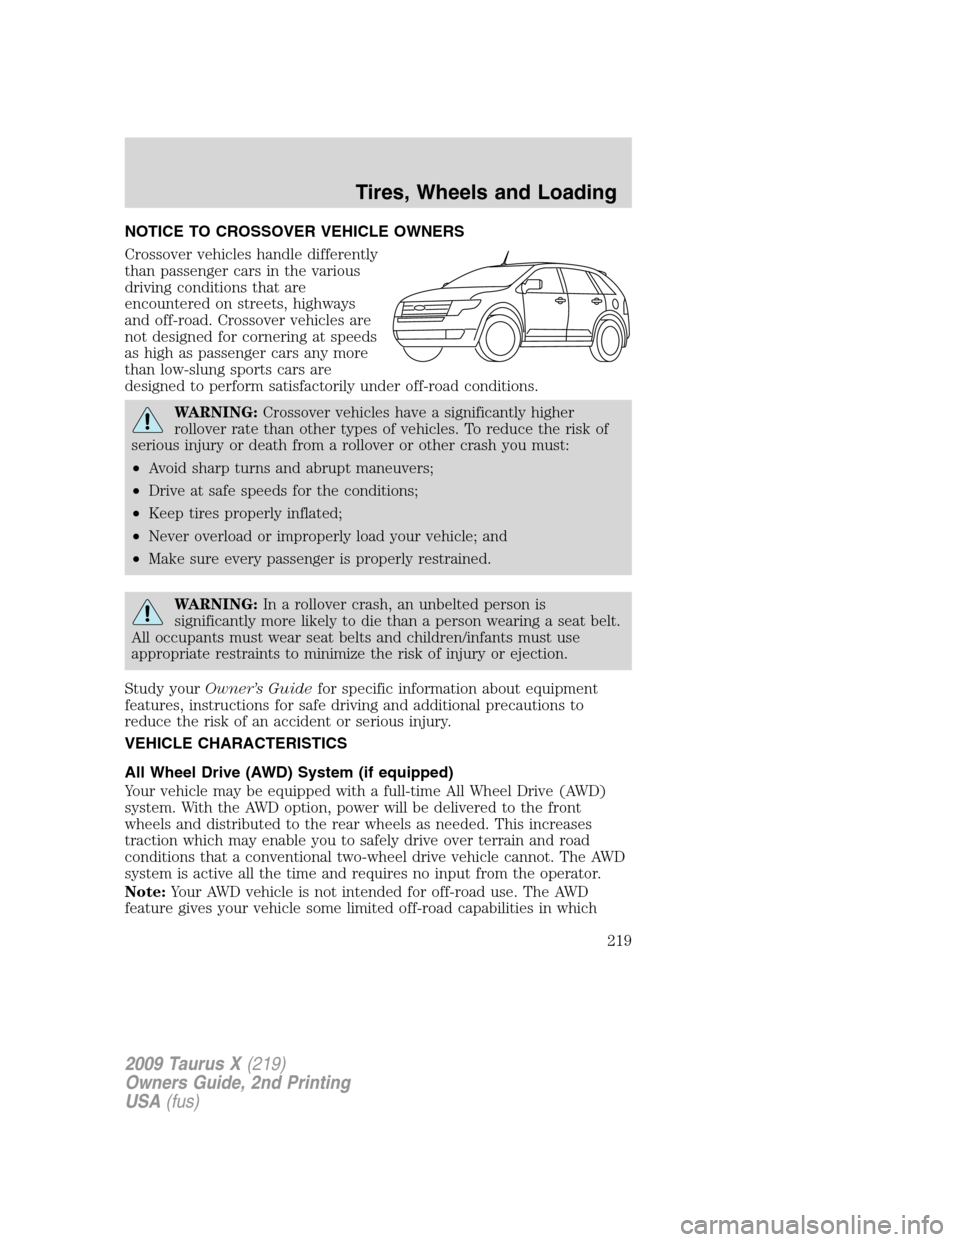 FORD TAURUS X 2009 1.G Owners Manual NOTICE TO CROSSOVER VEHICLE OWNERS
Crossover vehicles handle differently
than passenger cars in the various
driving conditions that are
encountered on streets, highways
and off-road. Crossover vehicle